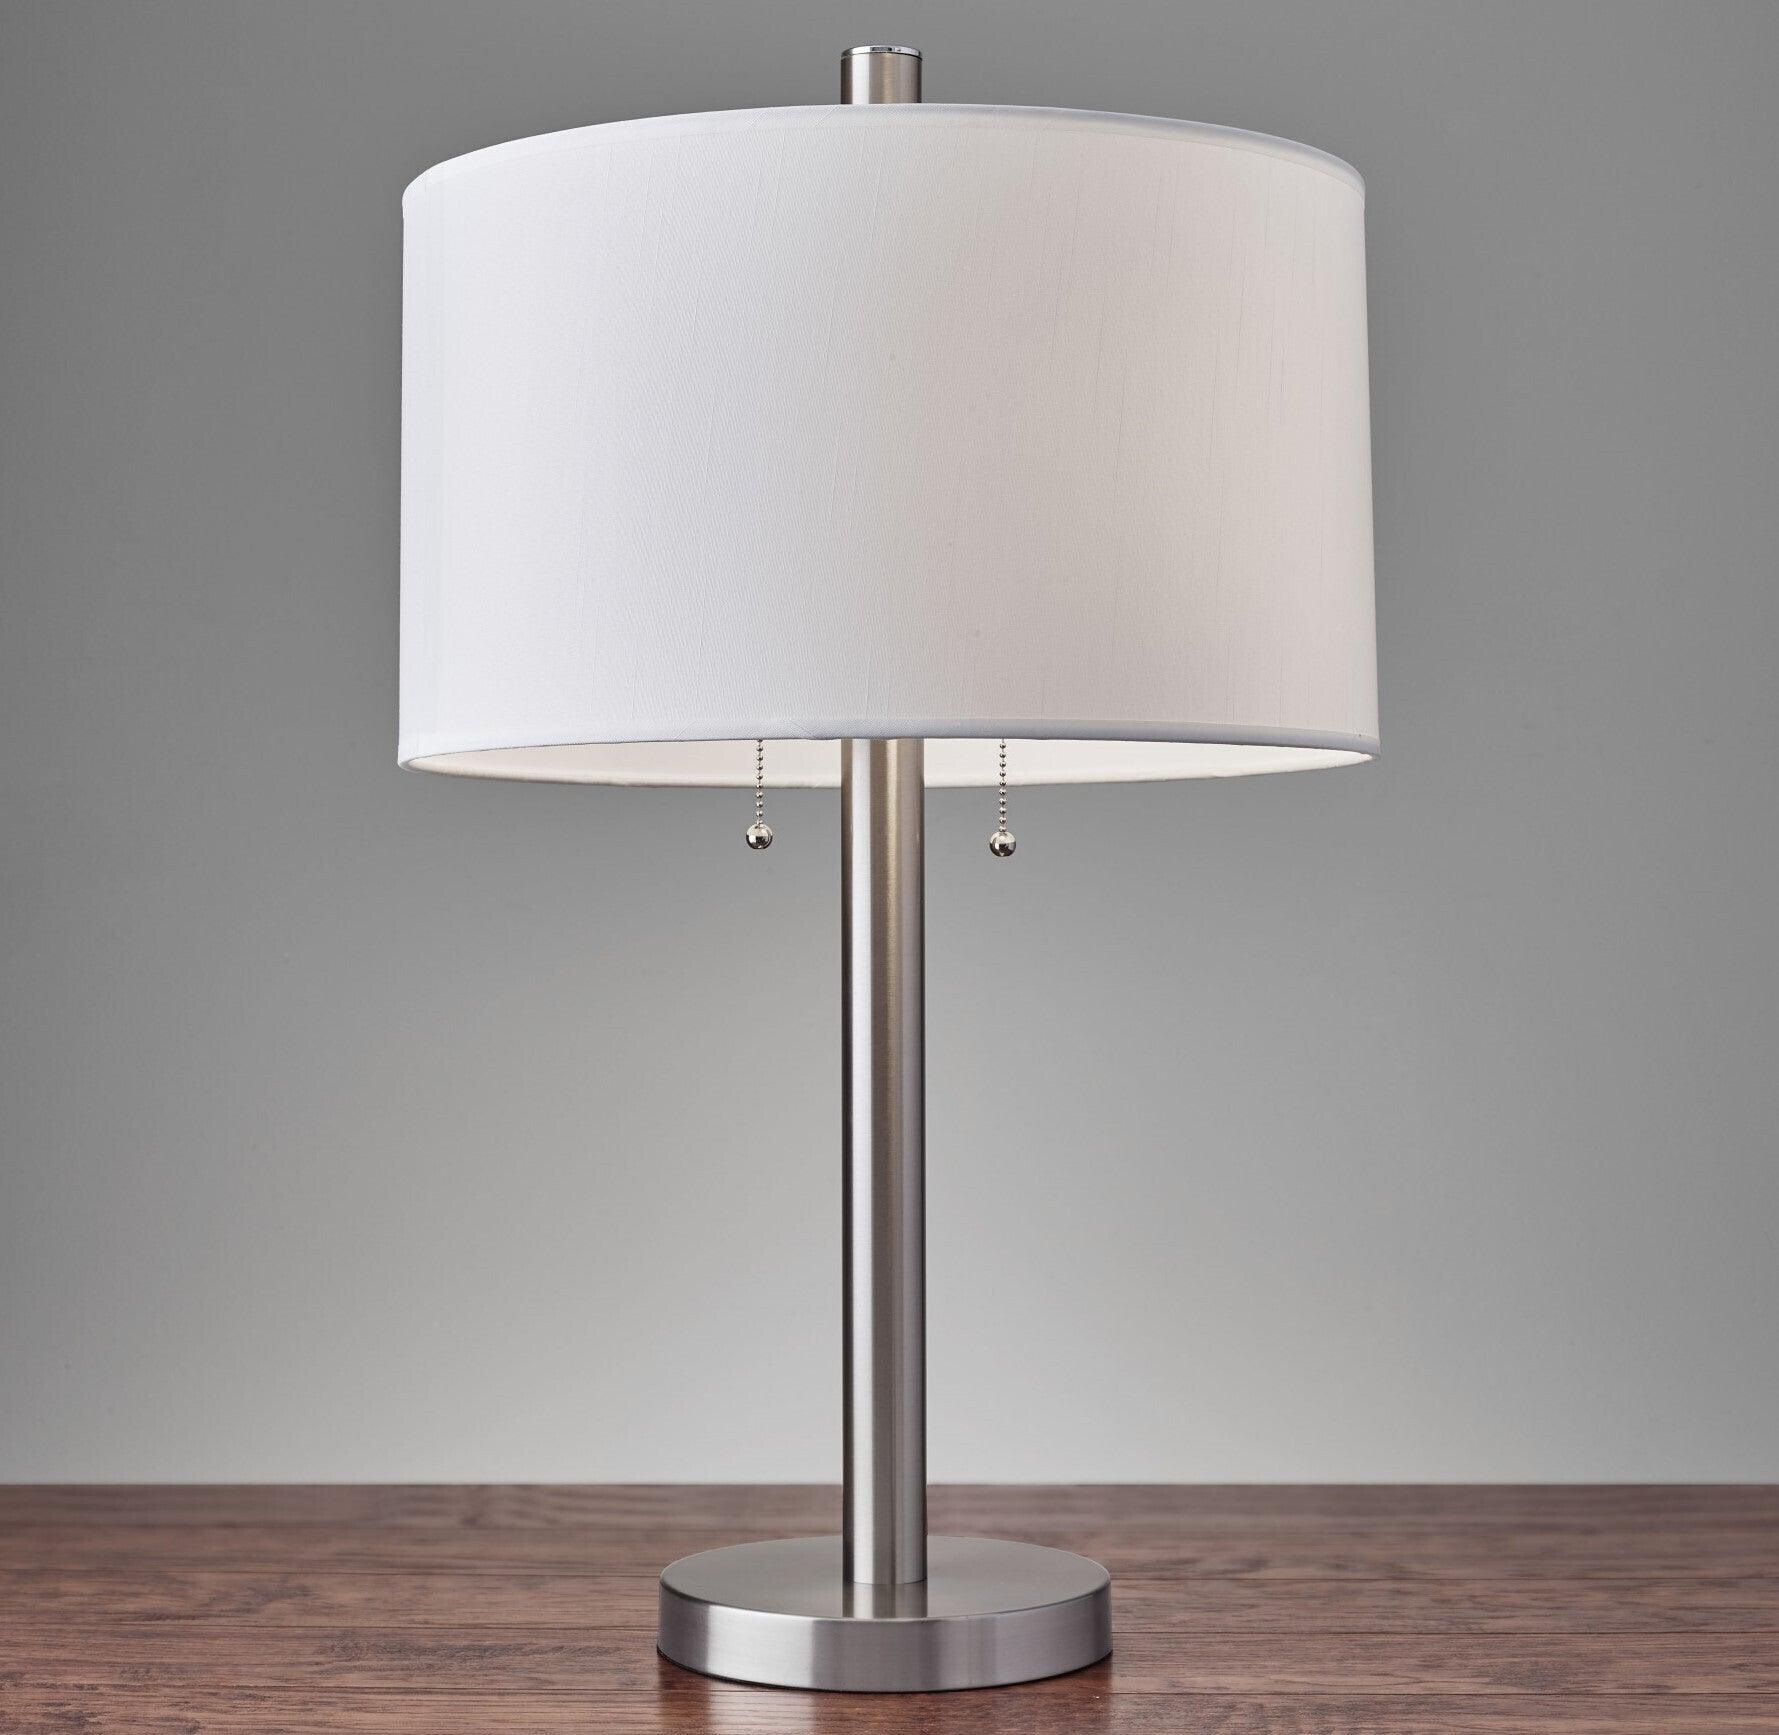 Adesso Table Lamps - Boulevard Table Lamp White